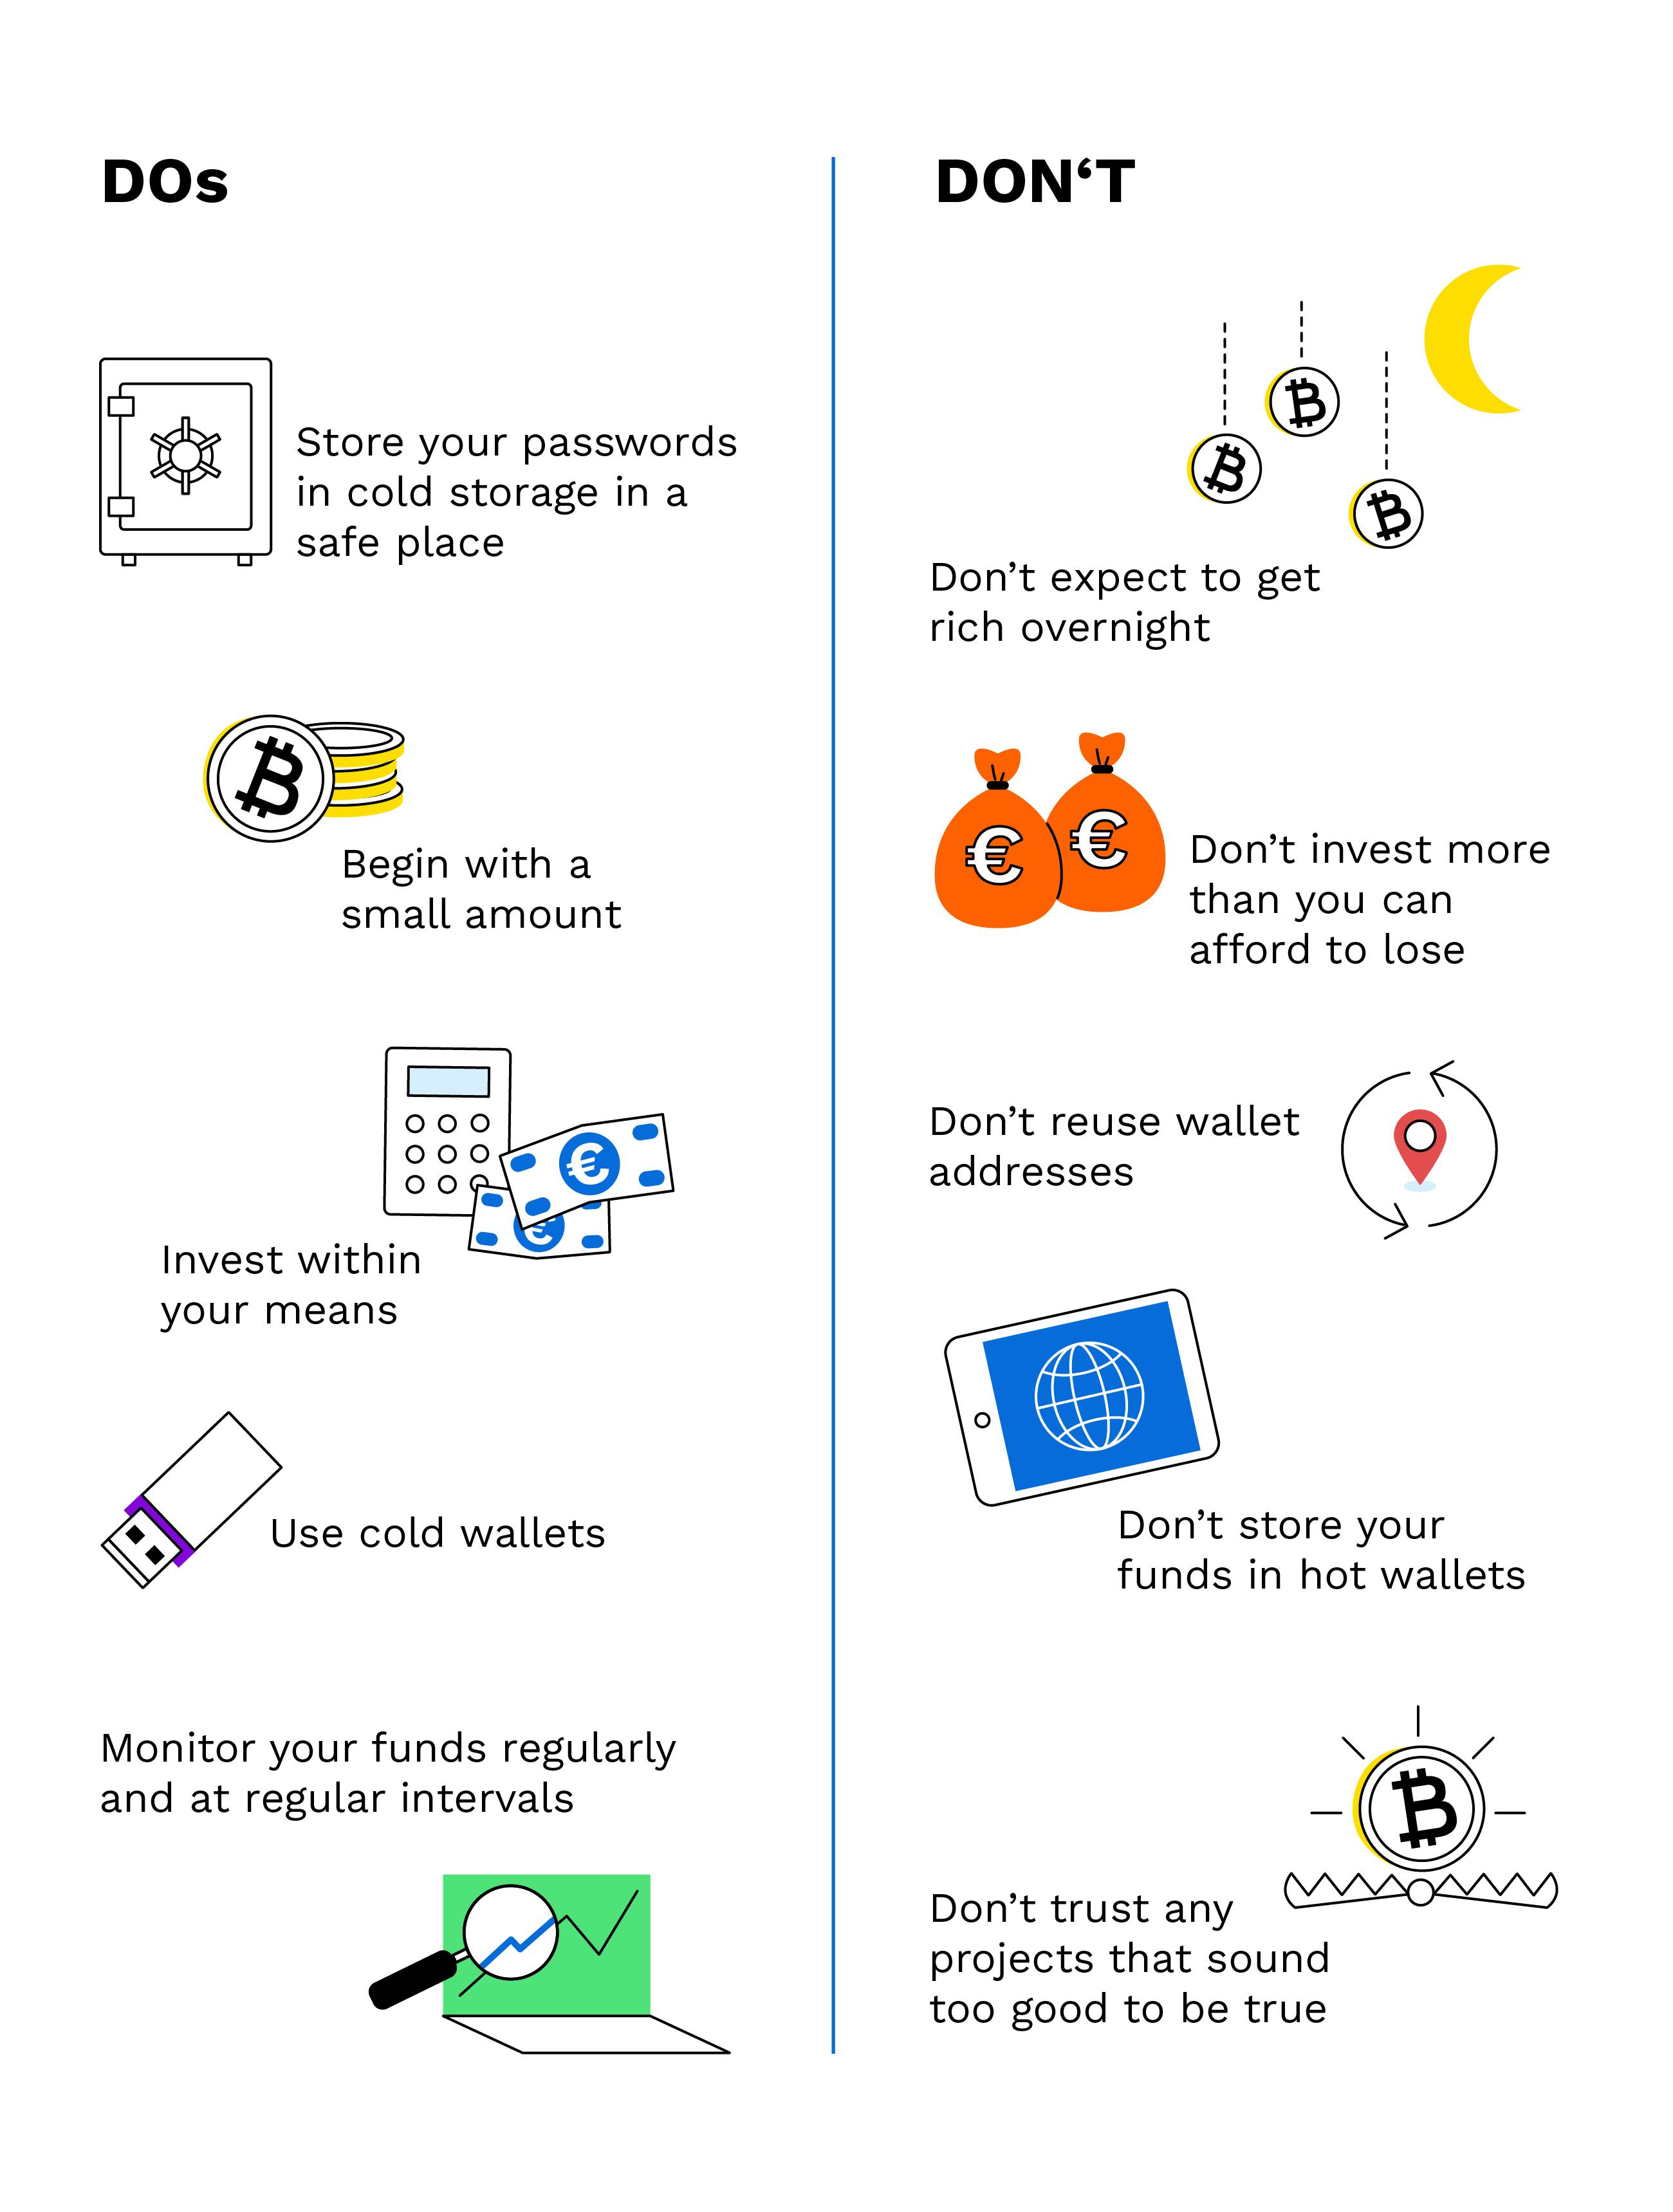 How to Get Started with Bitcoin → [Step-By-Step Beginner Guide]